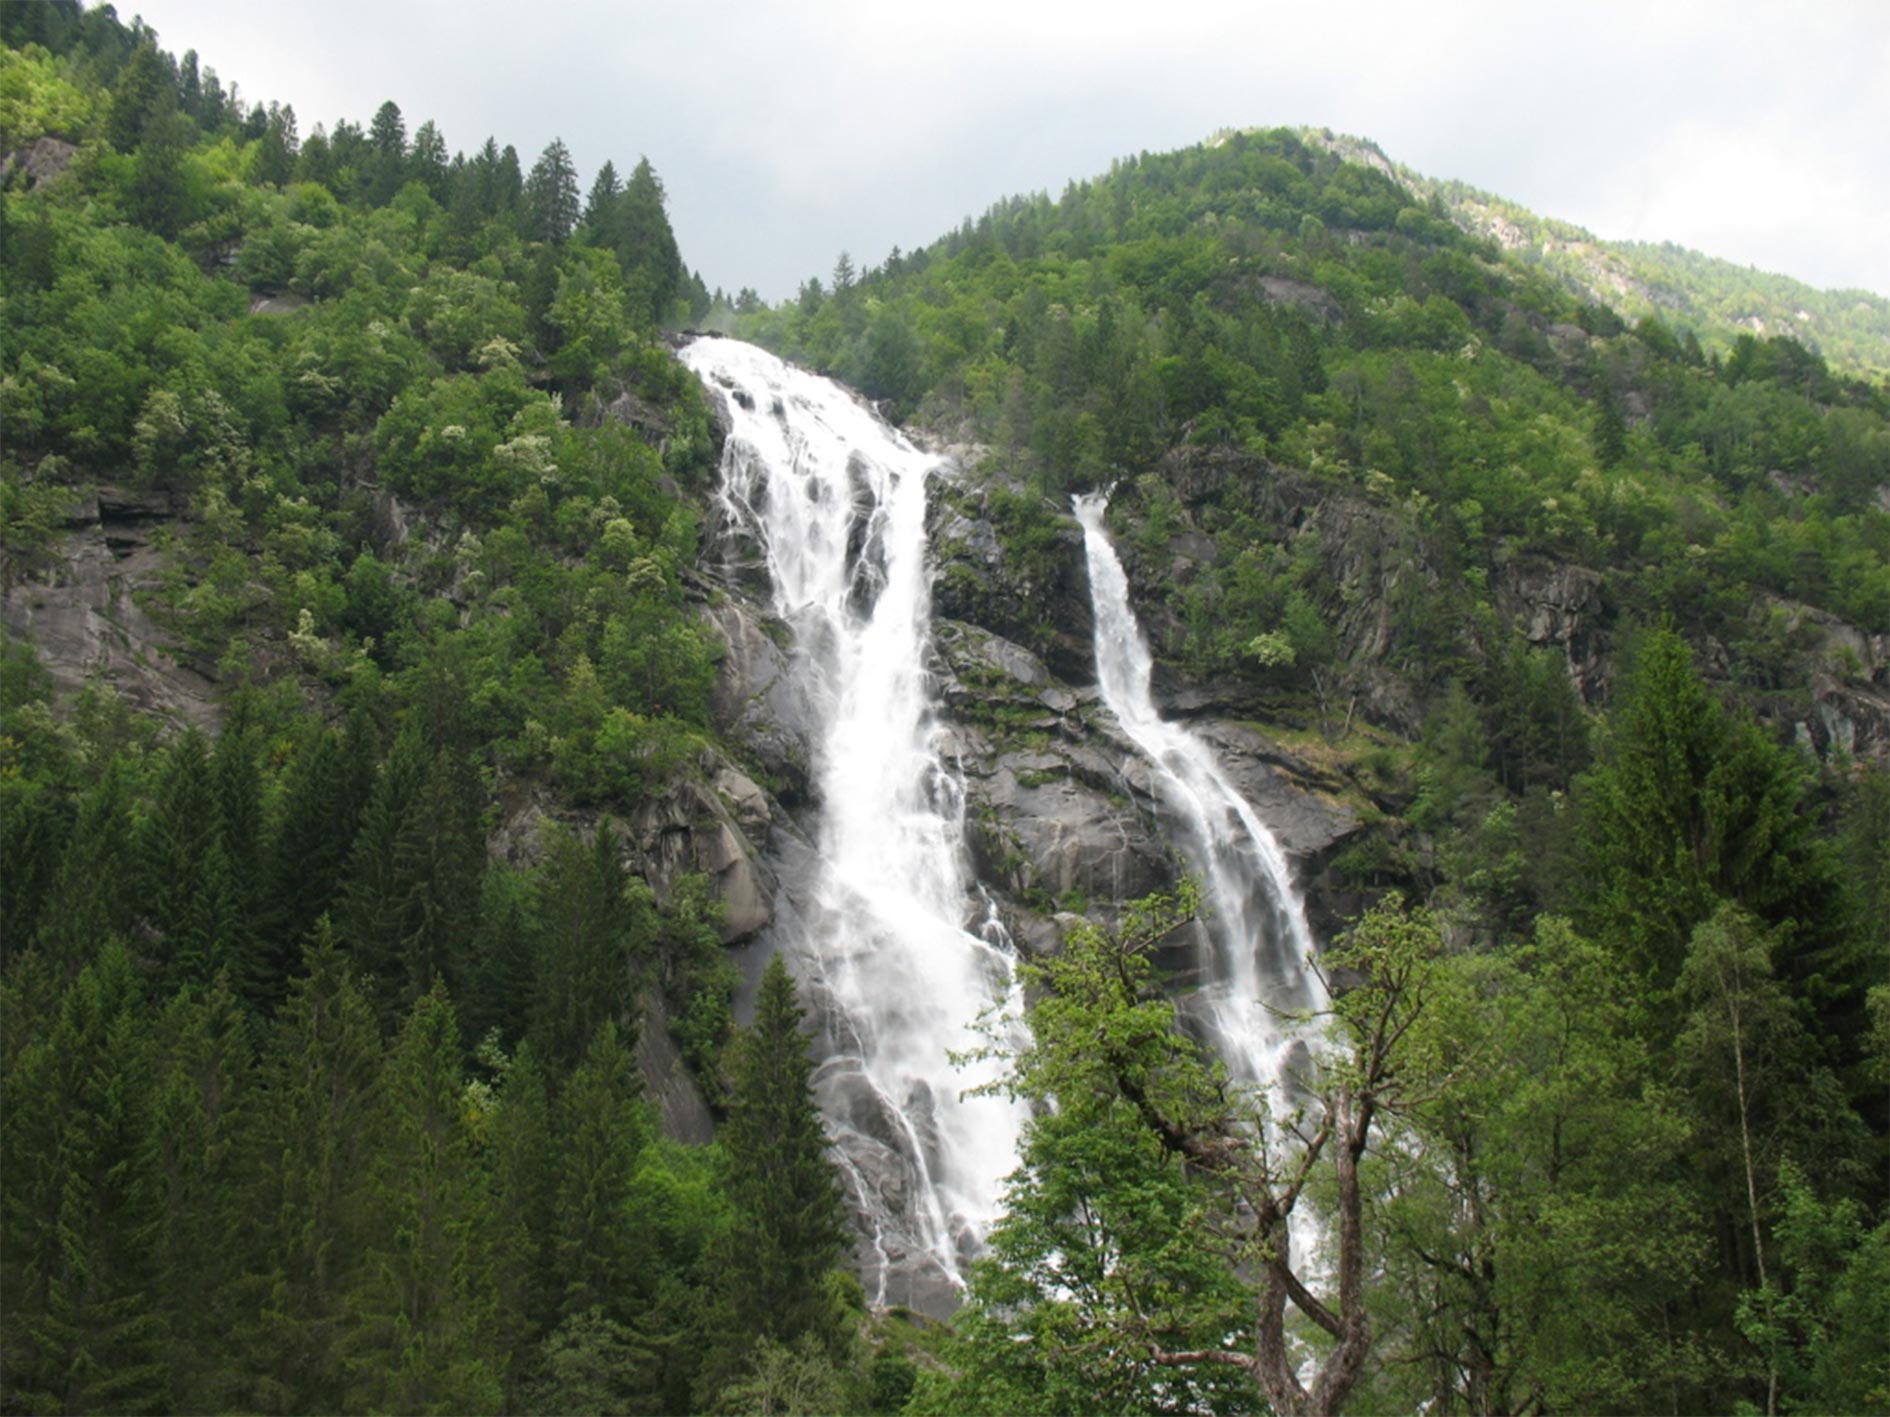 Nardis waterfall is the second waterfall in Italy in size